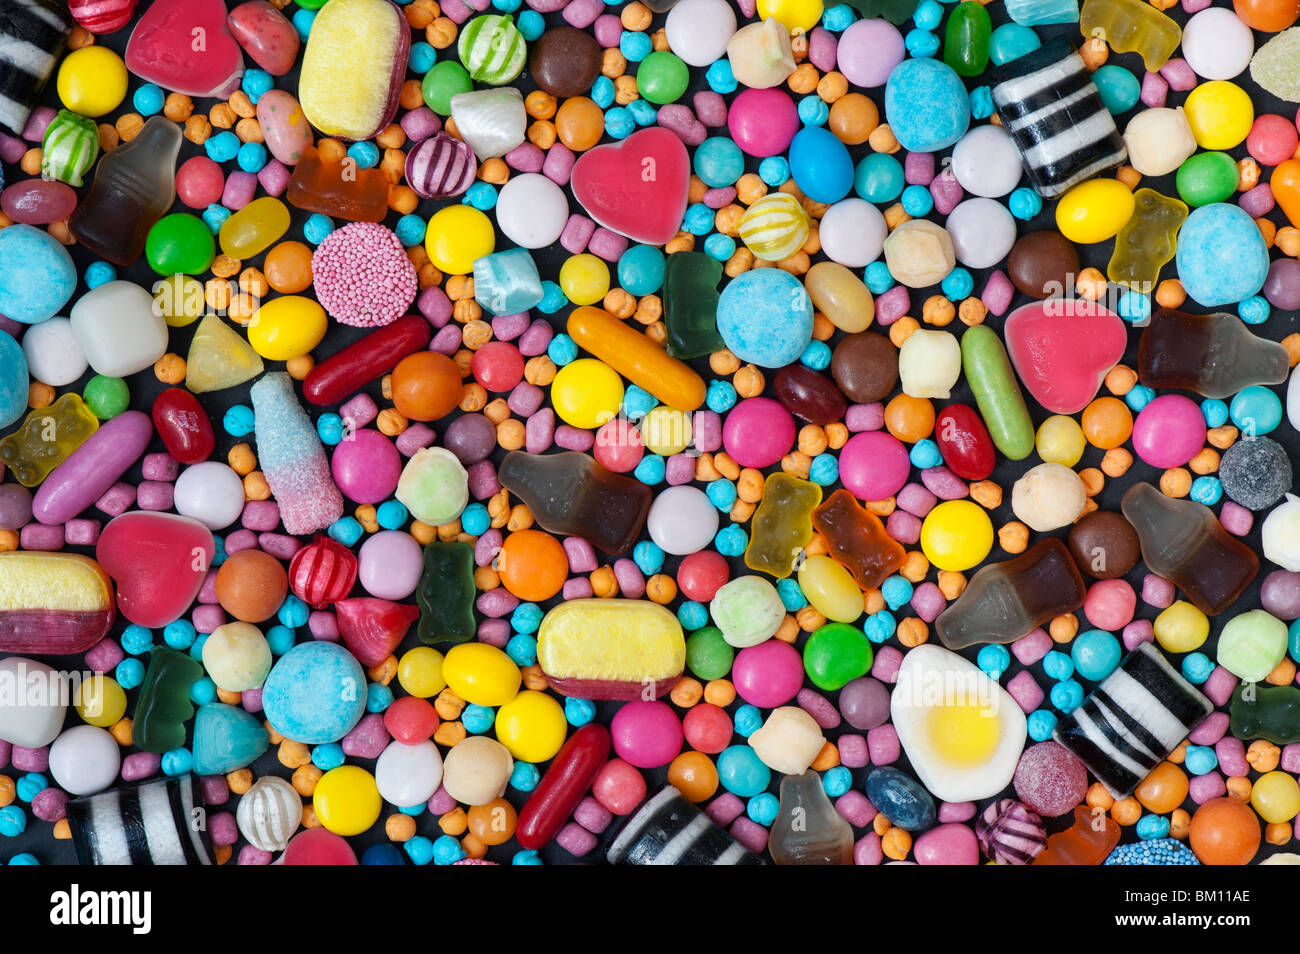 Colourful assorted childrens sweets and candy Stock Photo